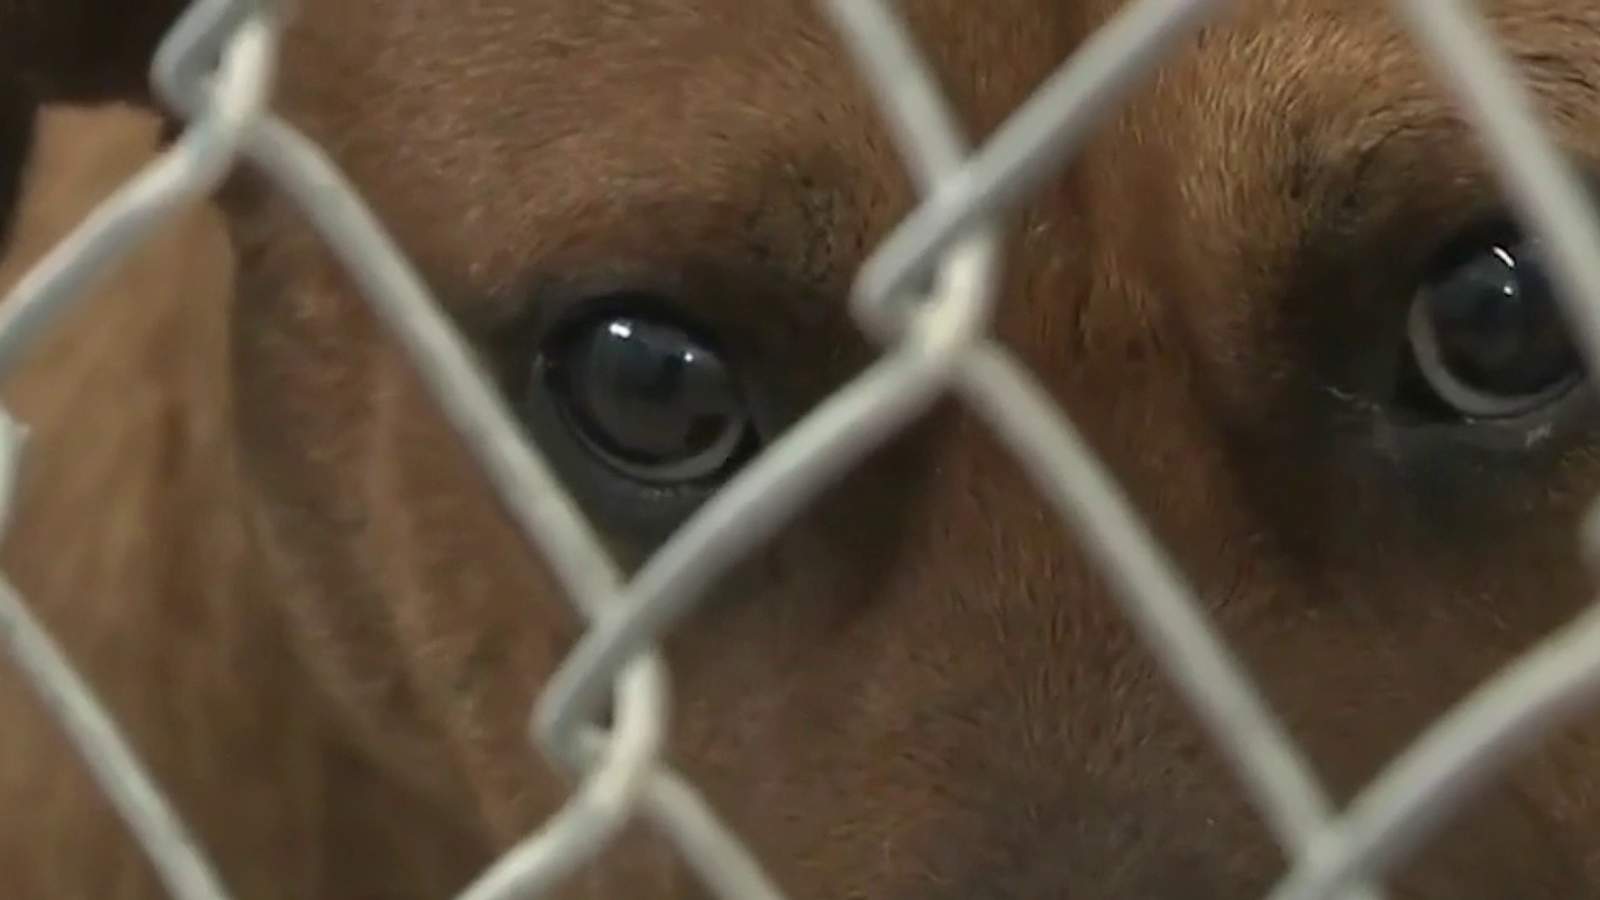 Record spike in pet adoptions, fostering amid pandemic